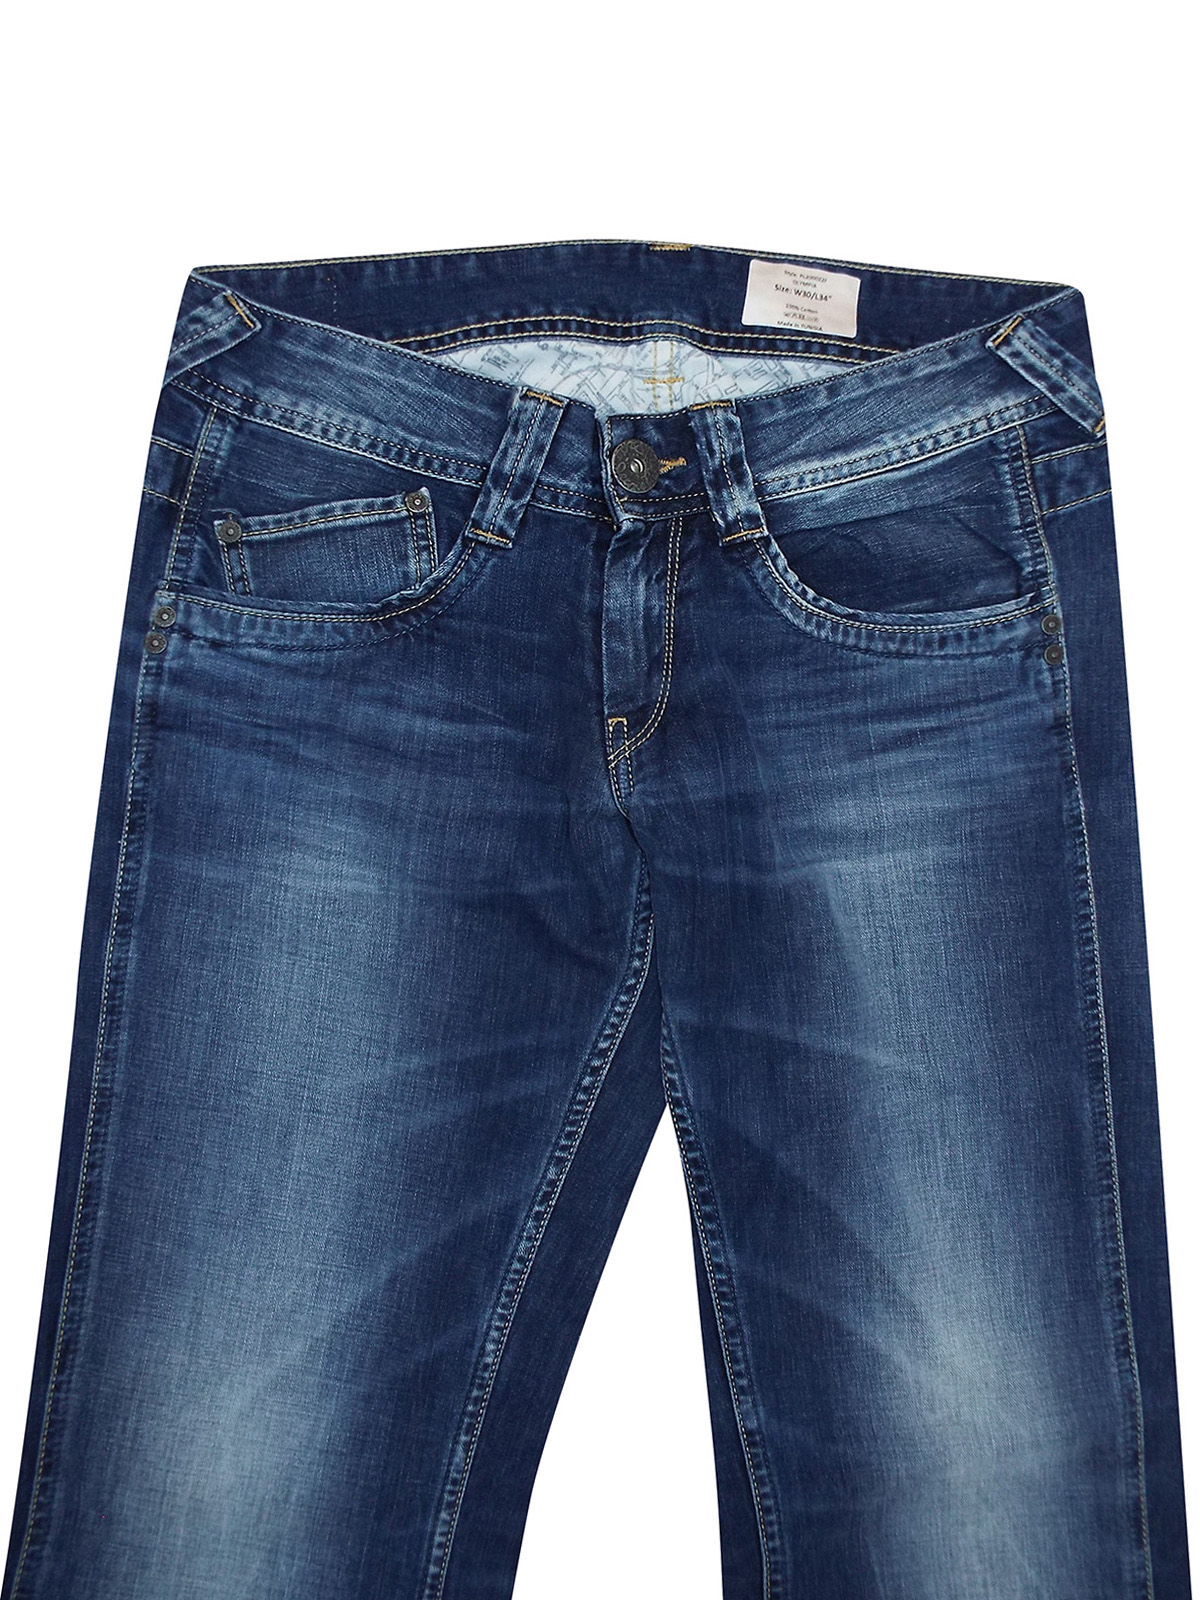 Pepe Jeans - - Pepe Jeans OLYMPIA DarkDENIM Comfort Fit Jeans - Waist ...